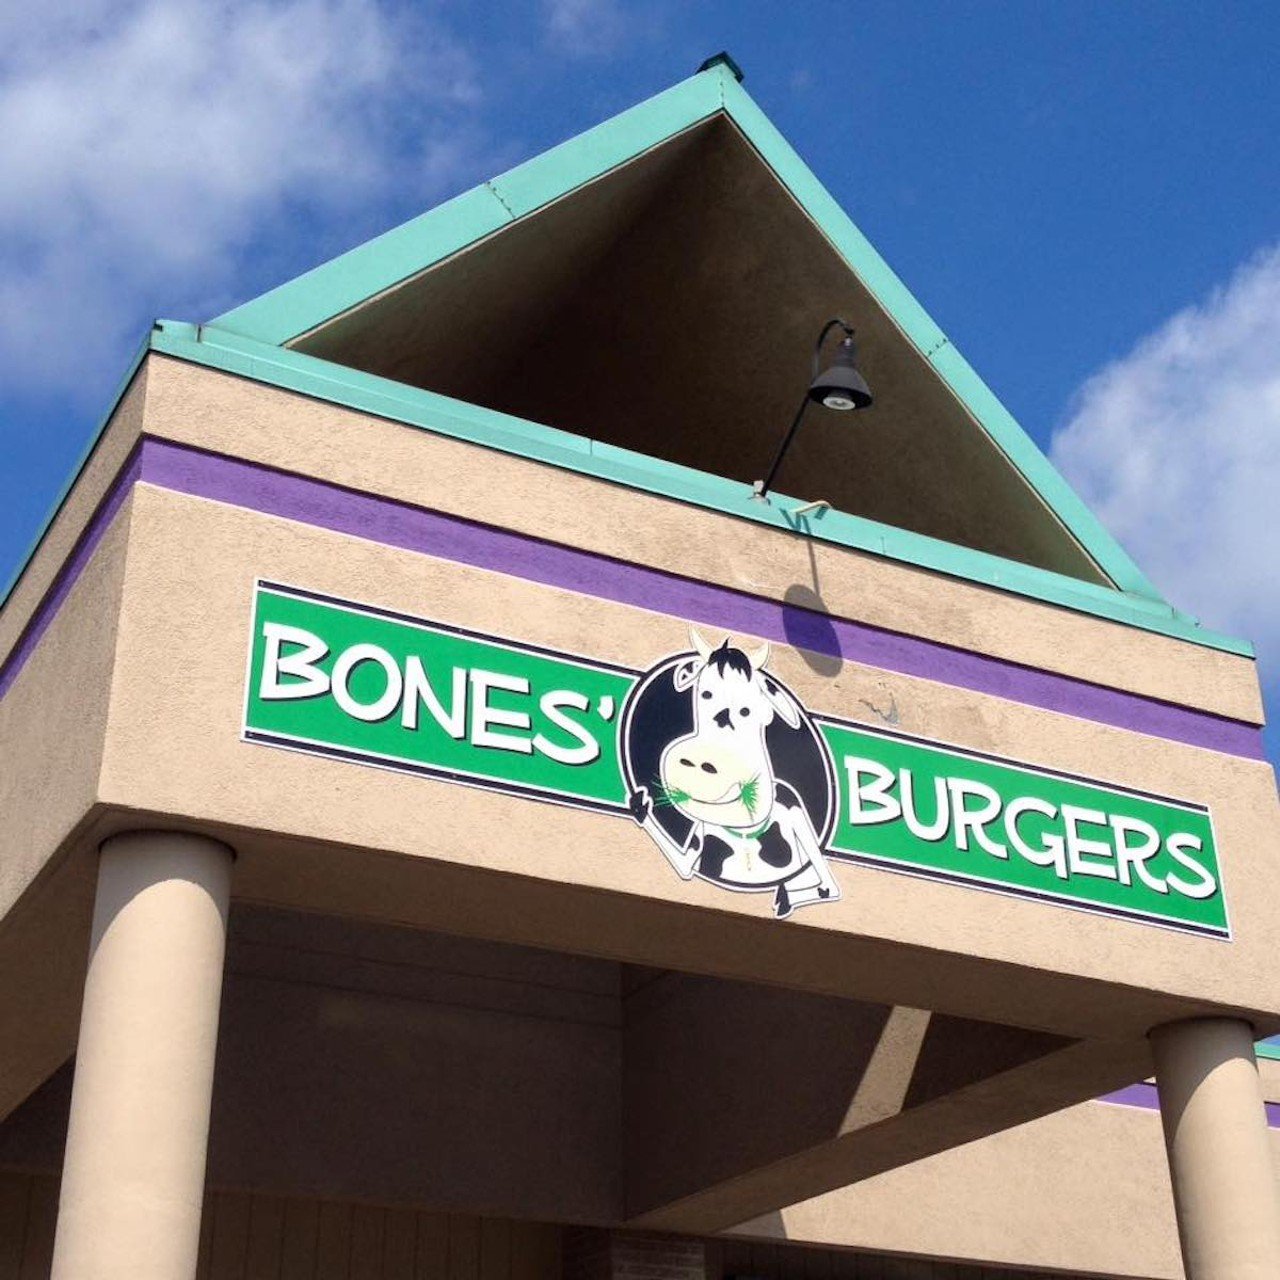 Bones’ Burgers: The Suki Jane Burger
9721 Montgomery Road, Montgomery
Who it’s named after: The mother of Bones’ Burgers’ owner, Curtis Bonekemper
The burger: Features fried green tomato and house-made pimento cheese.